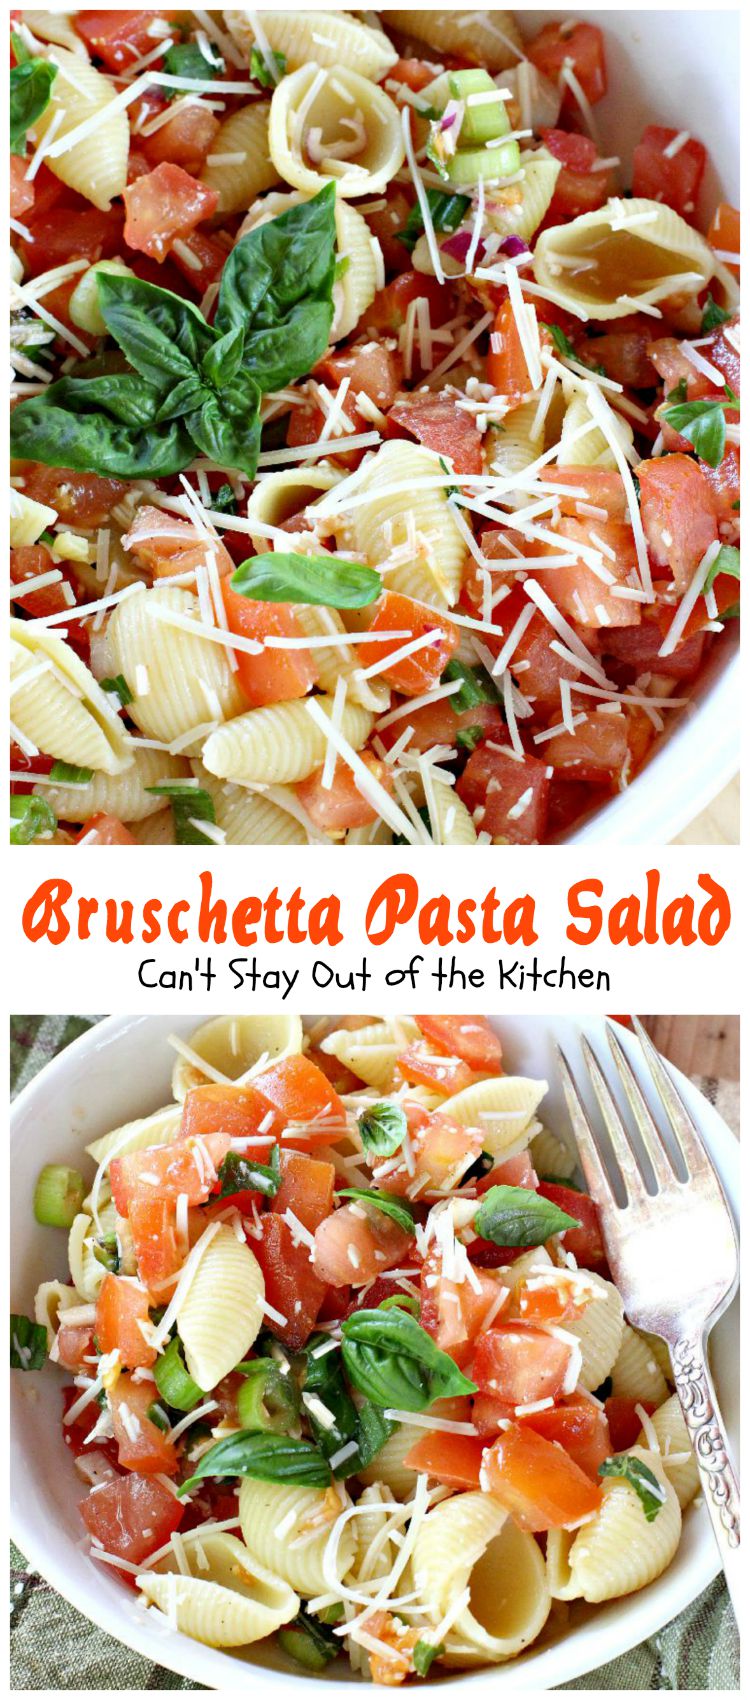 Bruschetta Pasta Salad - Can't Stay Out of the Kitchen